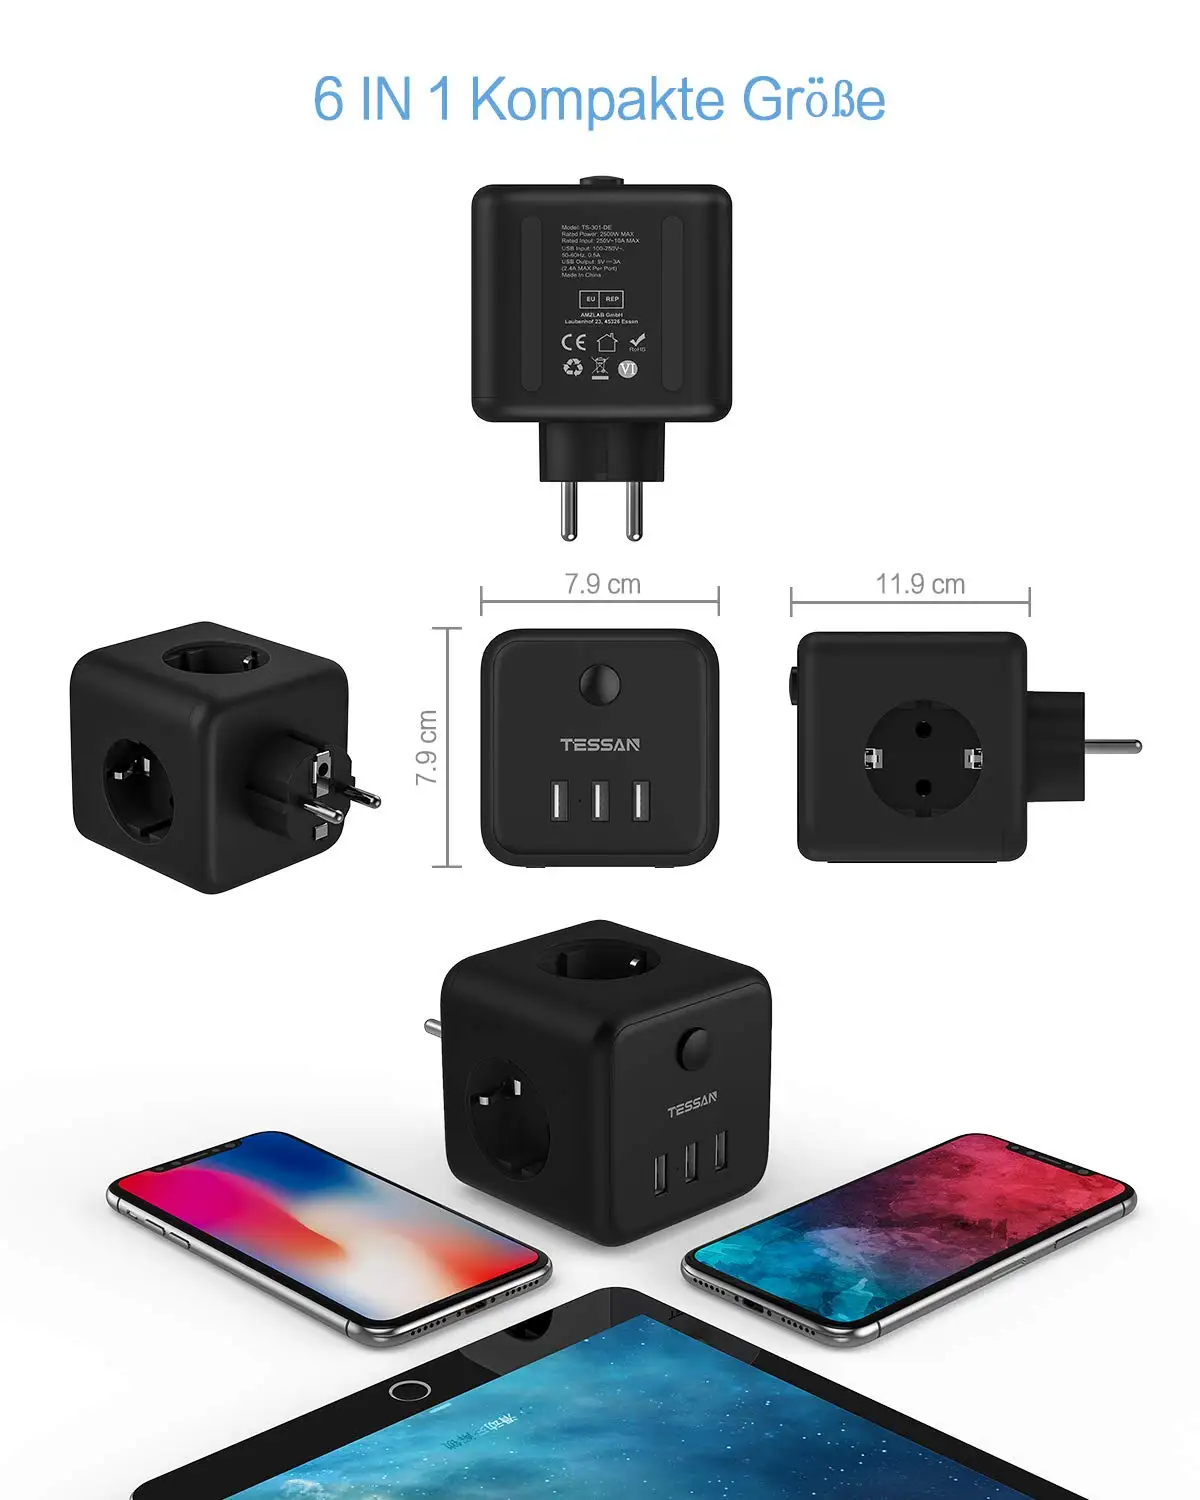 H9fa968dbf32d44bcb955c194b1c39754v TESSAN Black Cube USB Socket Power Strip with Switch, 3-Way Outlets (2500W / 10A) and 3 USB Ports, 1.5M Cable for Home, Office